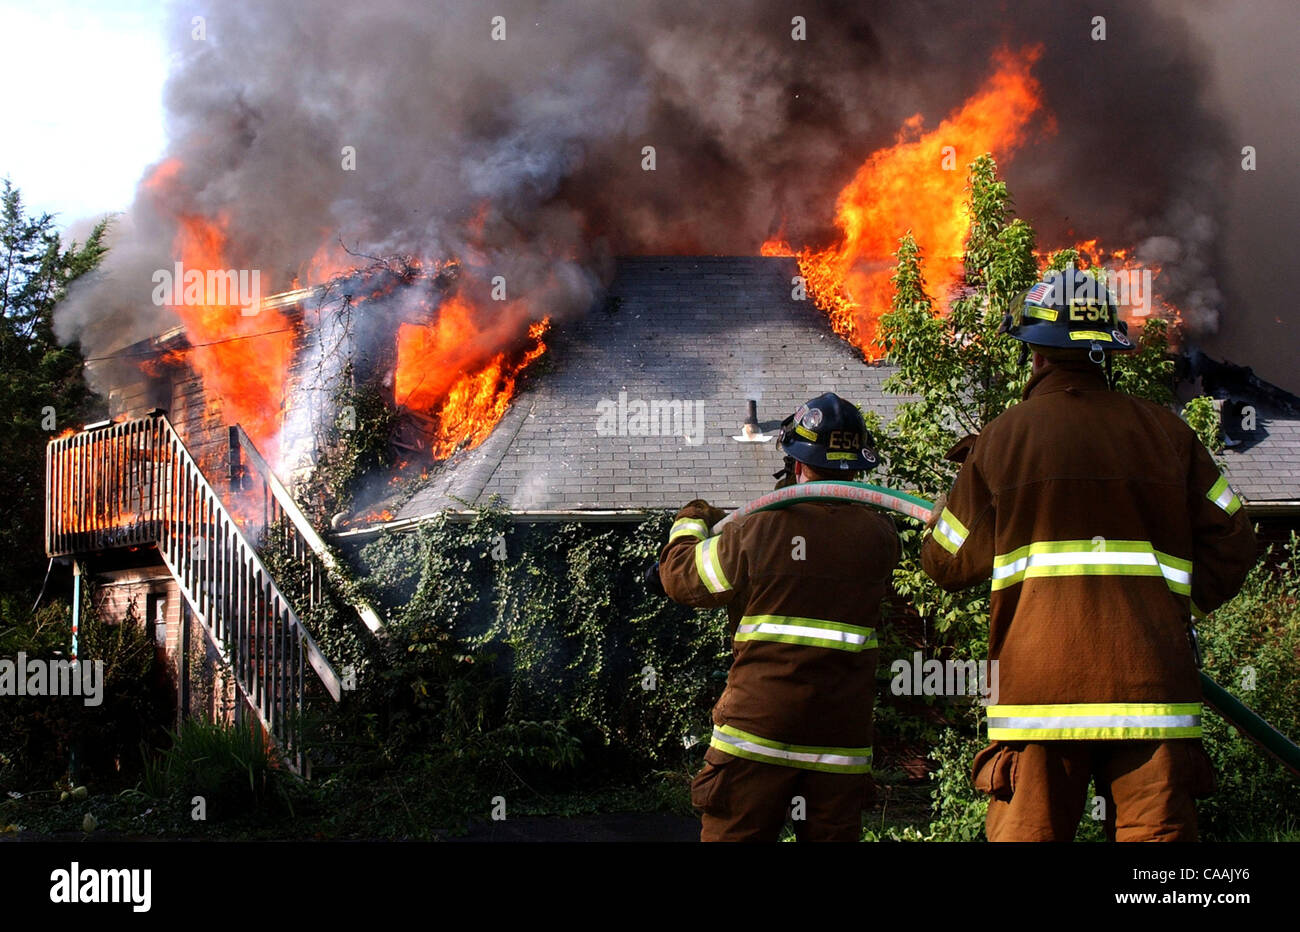 Sep 06, 2003 - Cincinnati, Ohio, USA - Firefighters burned the former Green Gables Motel at 4220 Harrison Ave as a training exercise. Pictured: Green Township Firefighters MIKE JOSEPH and JASON EDWARDS standby with hoses as the fire burns through the motel roof.   (Credit Image: © Ken Stewart/ZUMA P Stock Photo